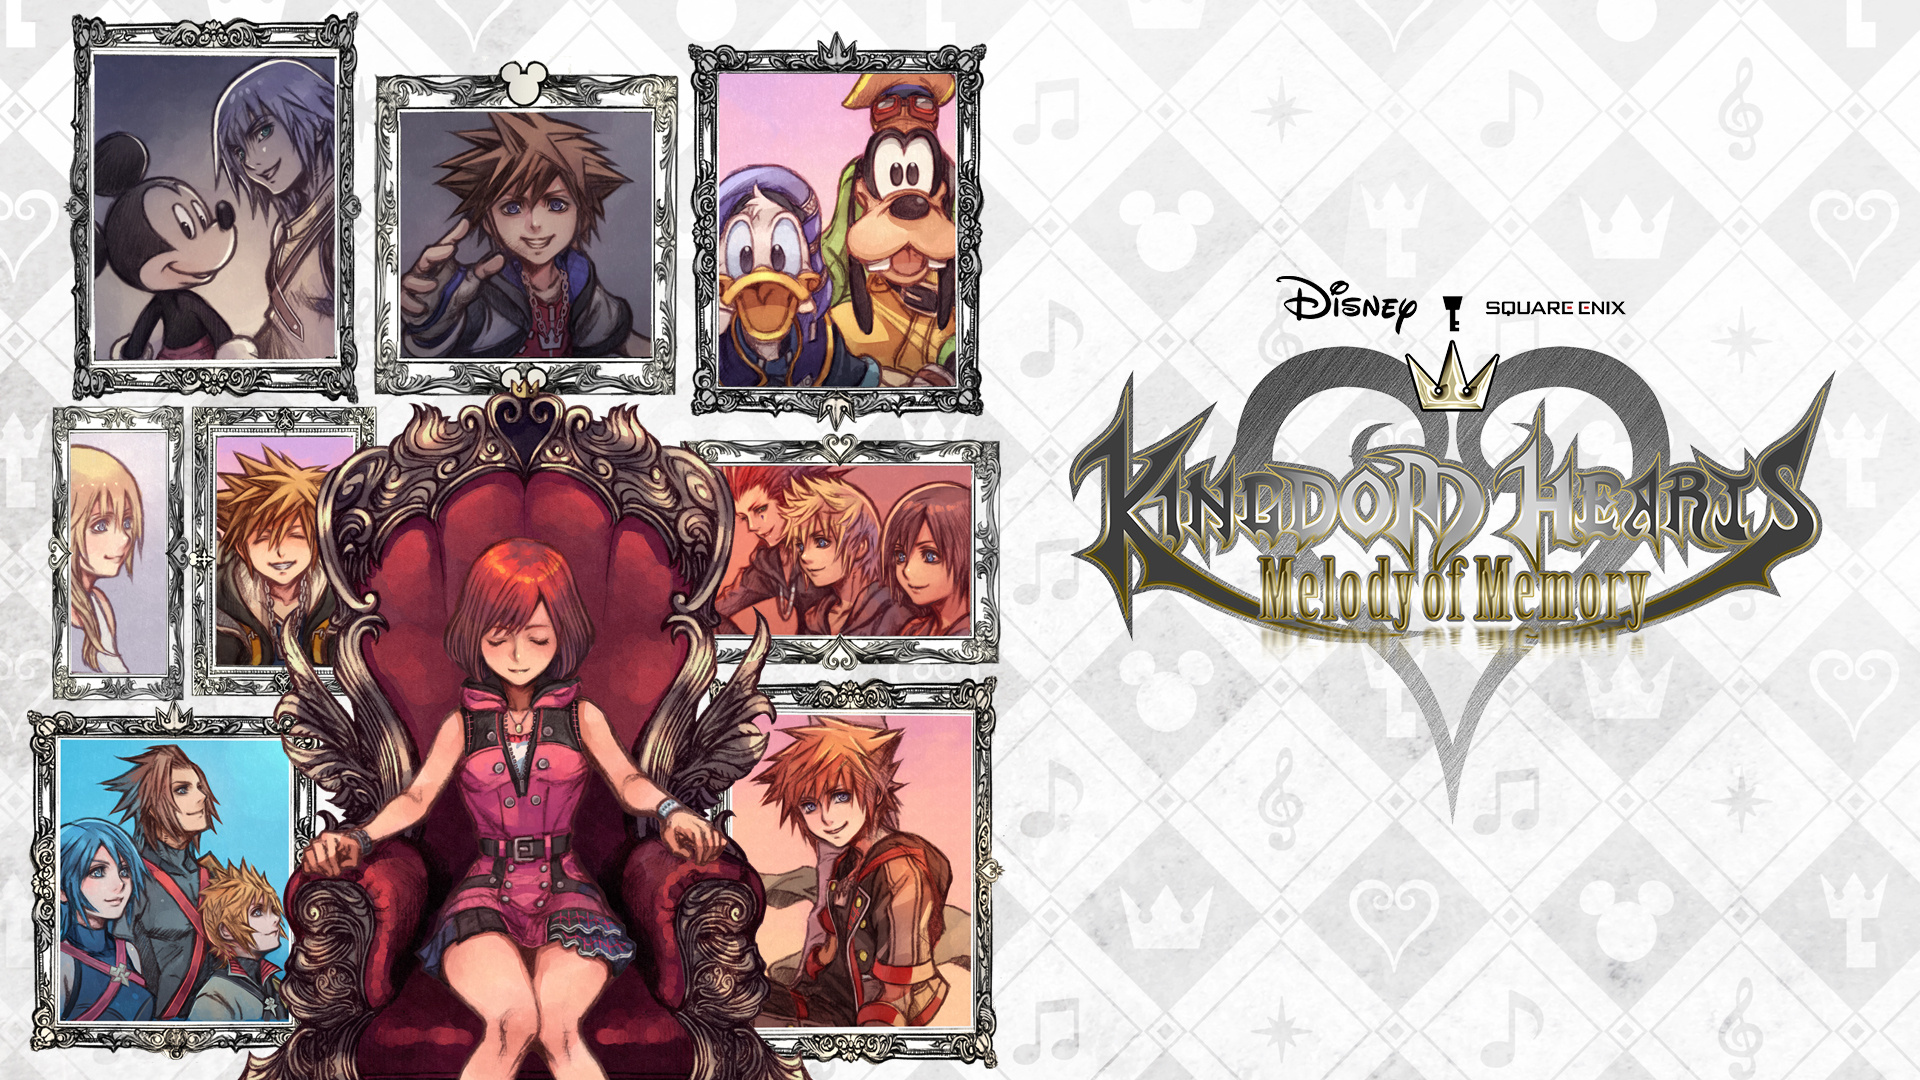 Kingdom Hearts Melody Of Memory Brings An Exclusive Mode To Switch This November Nintendo Life